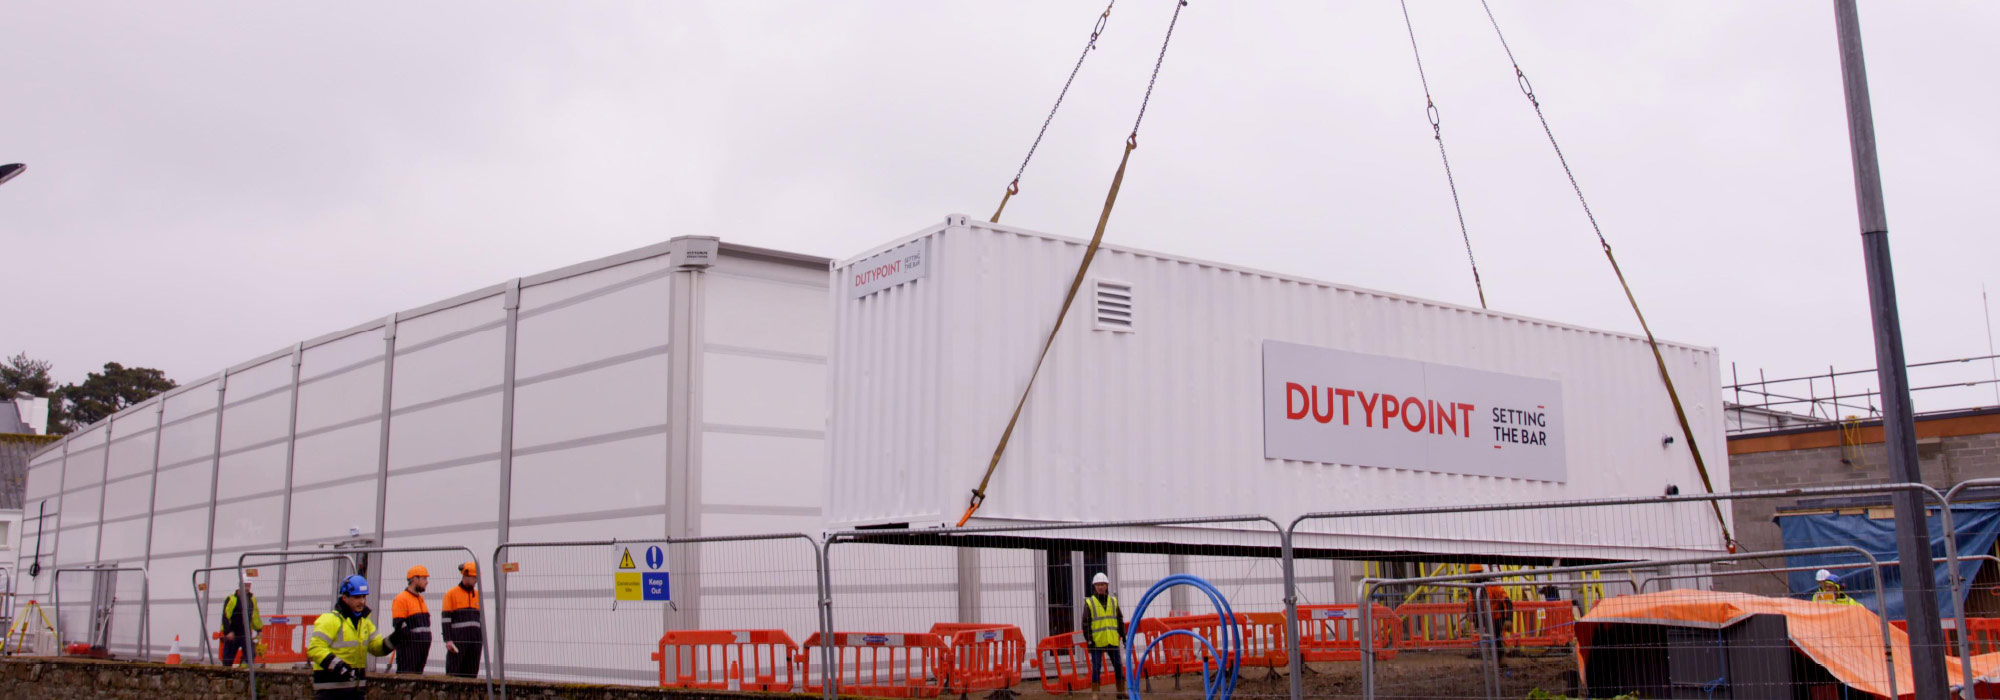 Dutypoint Shipping Container Being Lowered To Floor